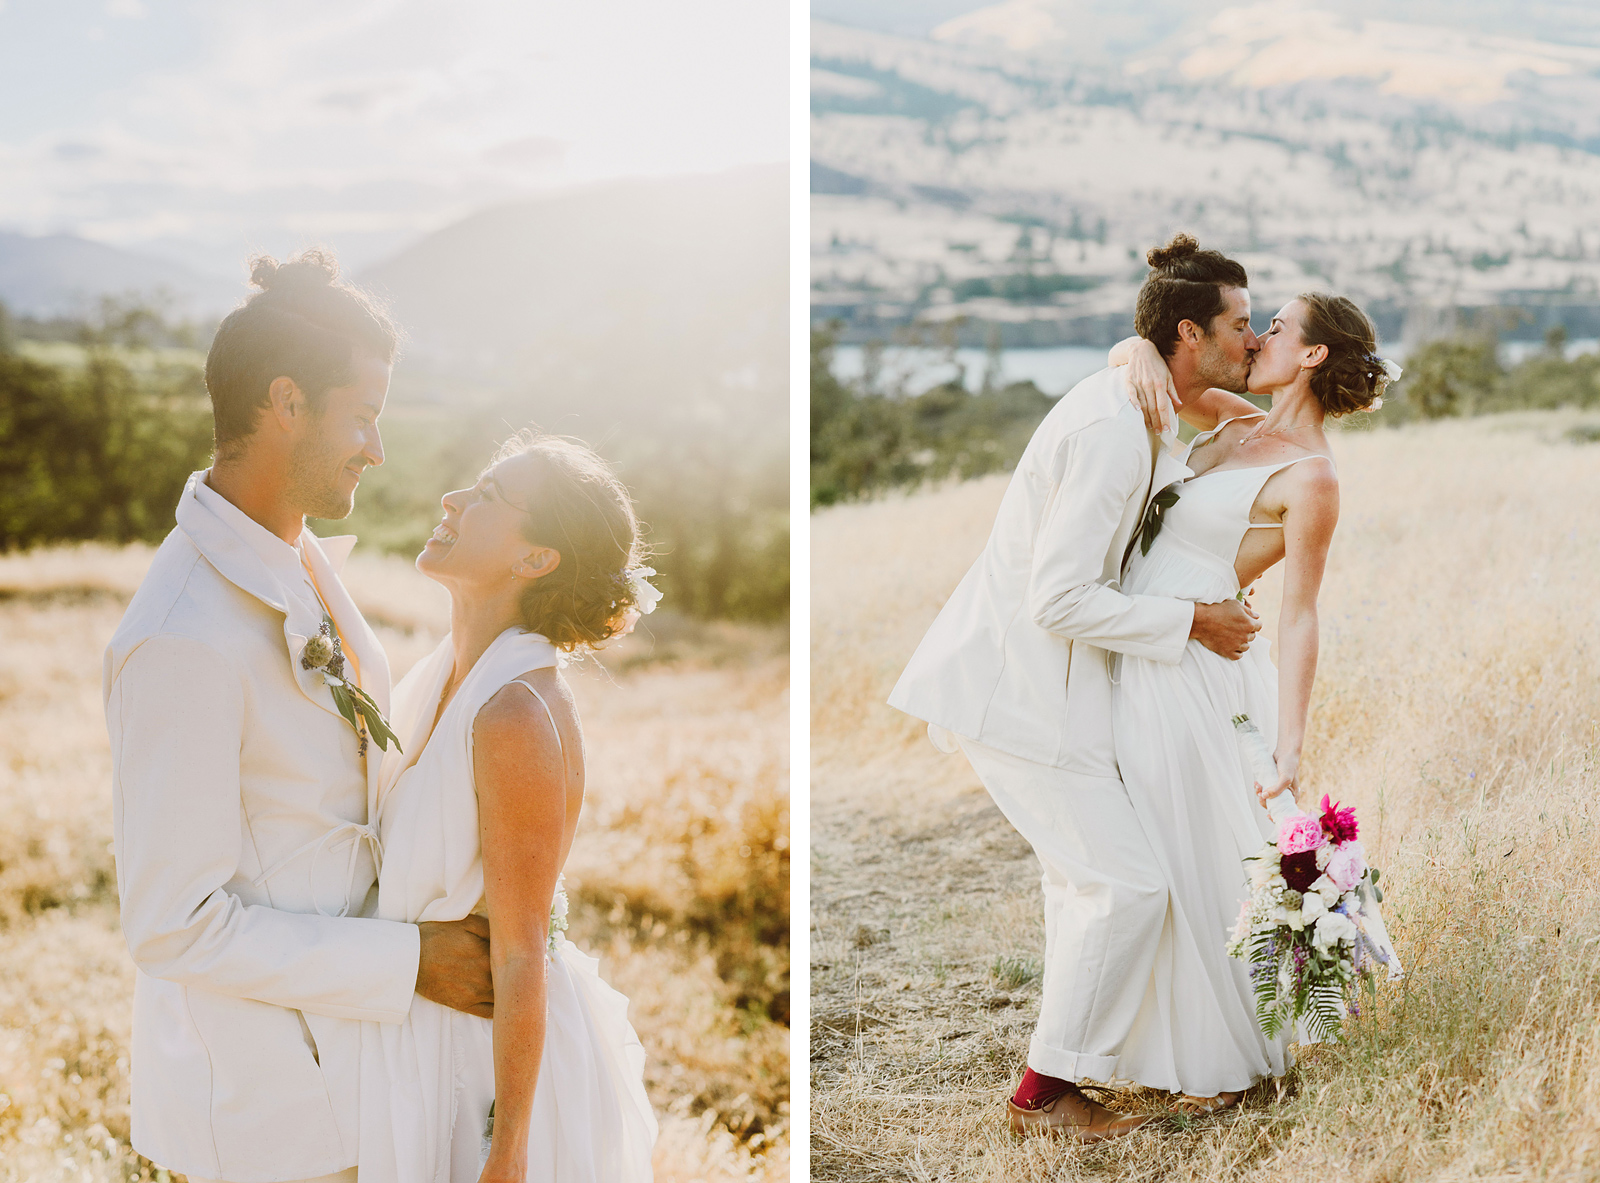 Portraits of bride and groom during golden hour in an open field - Columbia River Gorge wedding